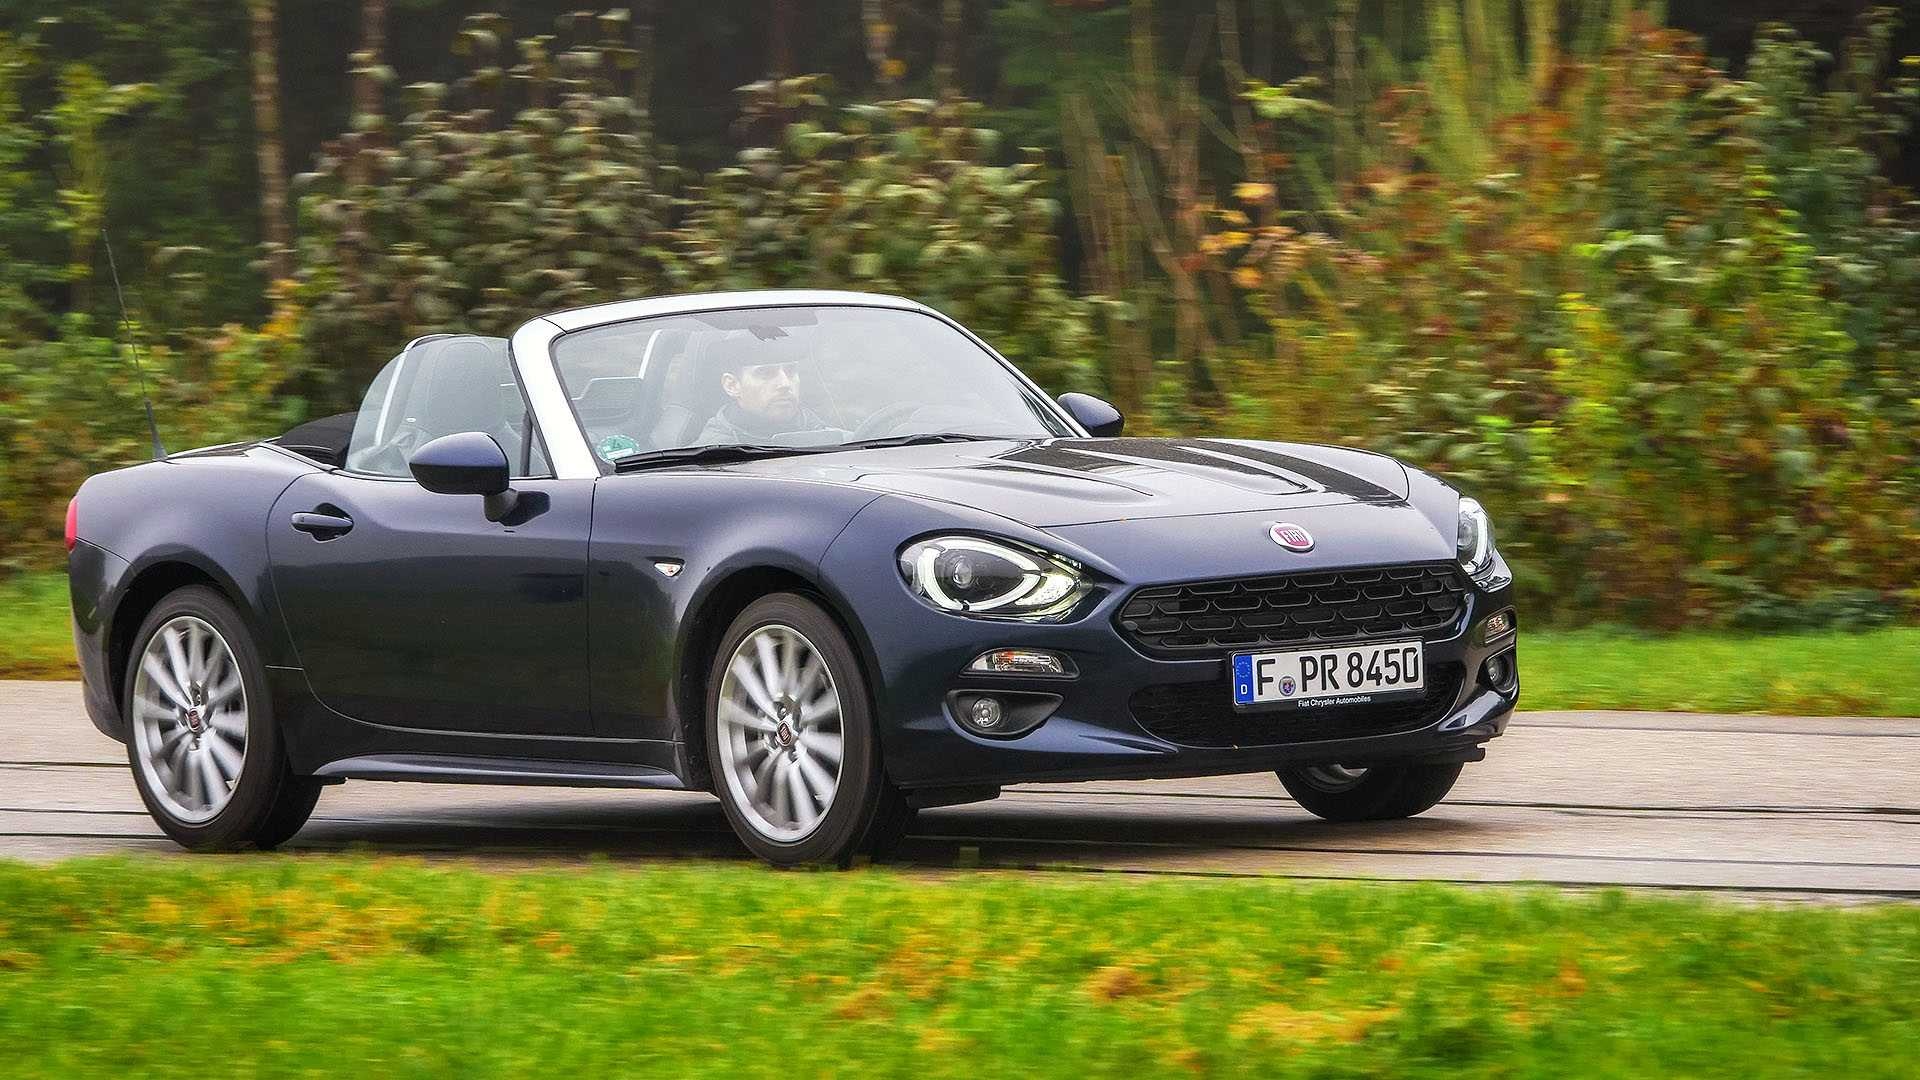 Fiat 124 Spider, 2018 test drive, Thrilling performance, Open-top experience, 1920x1080 Full HD Desktop